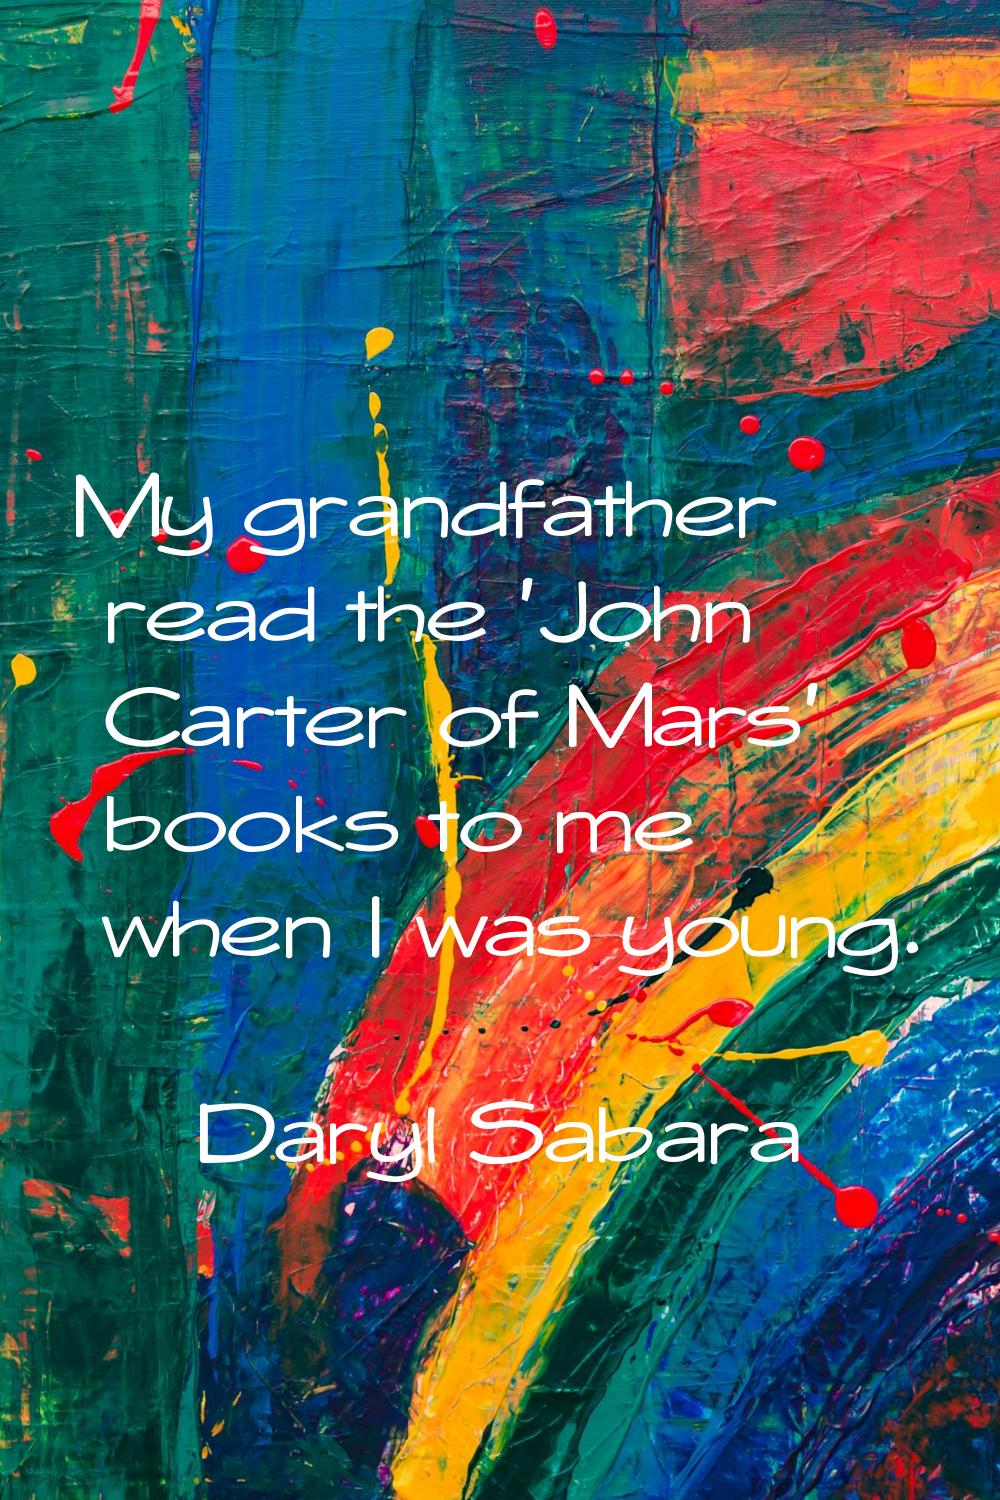 My grandfather read the 'John Carter of Mars' books to me when I was young.